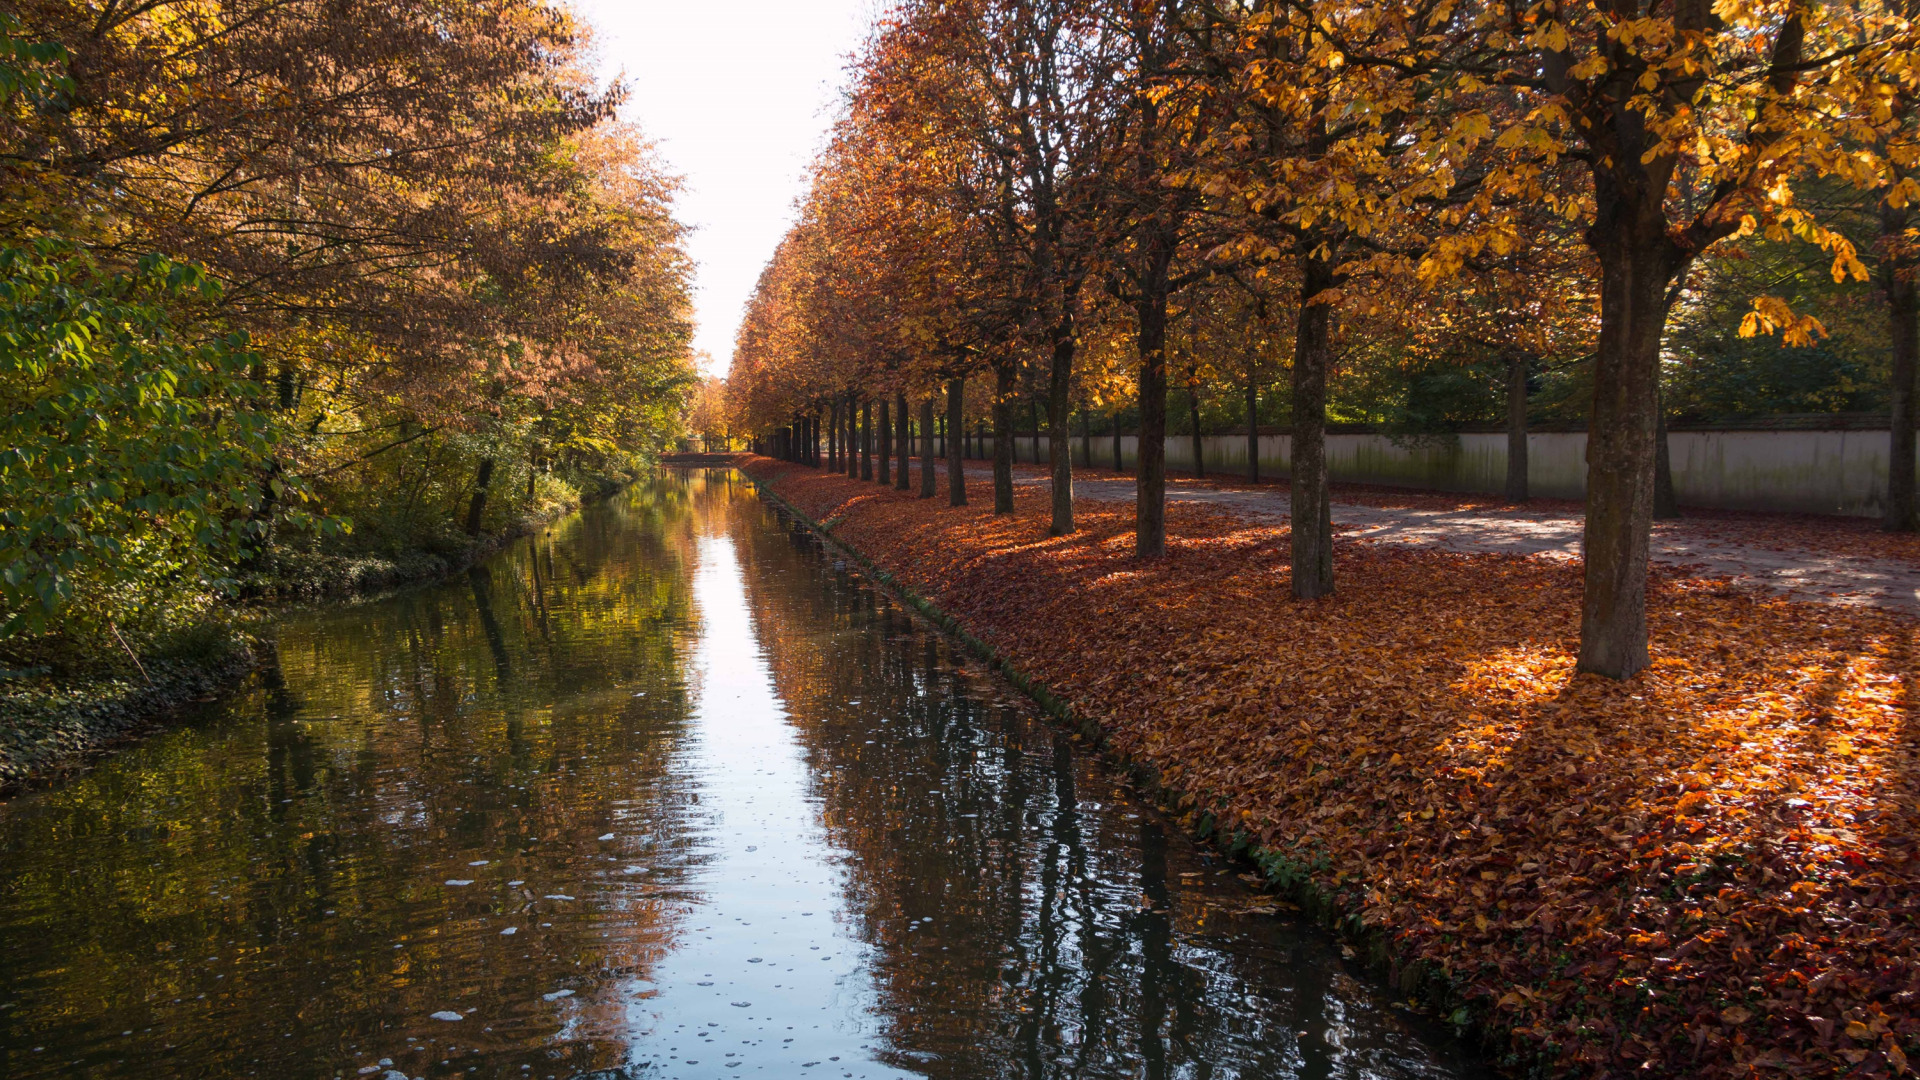 General 1920x1080 nature landscape water trees fall fallen leaves river Germany park